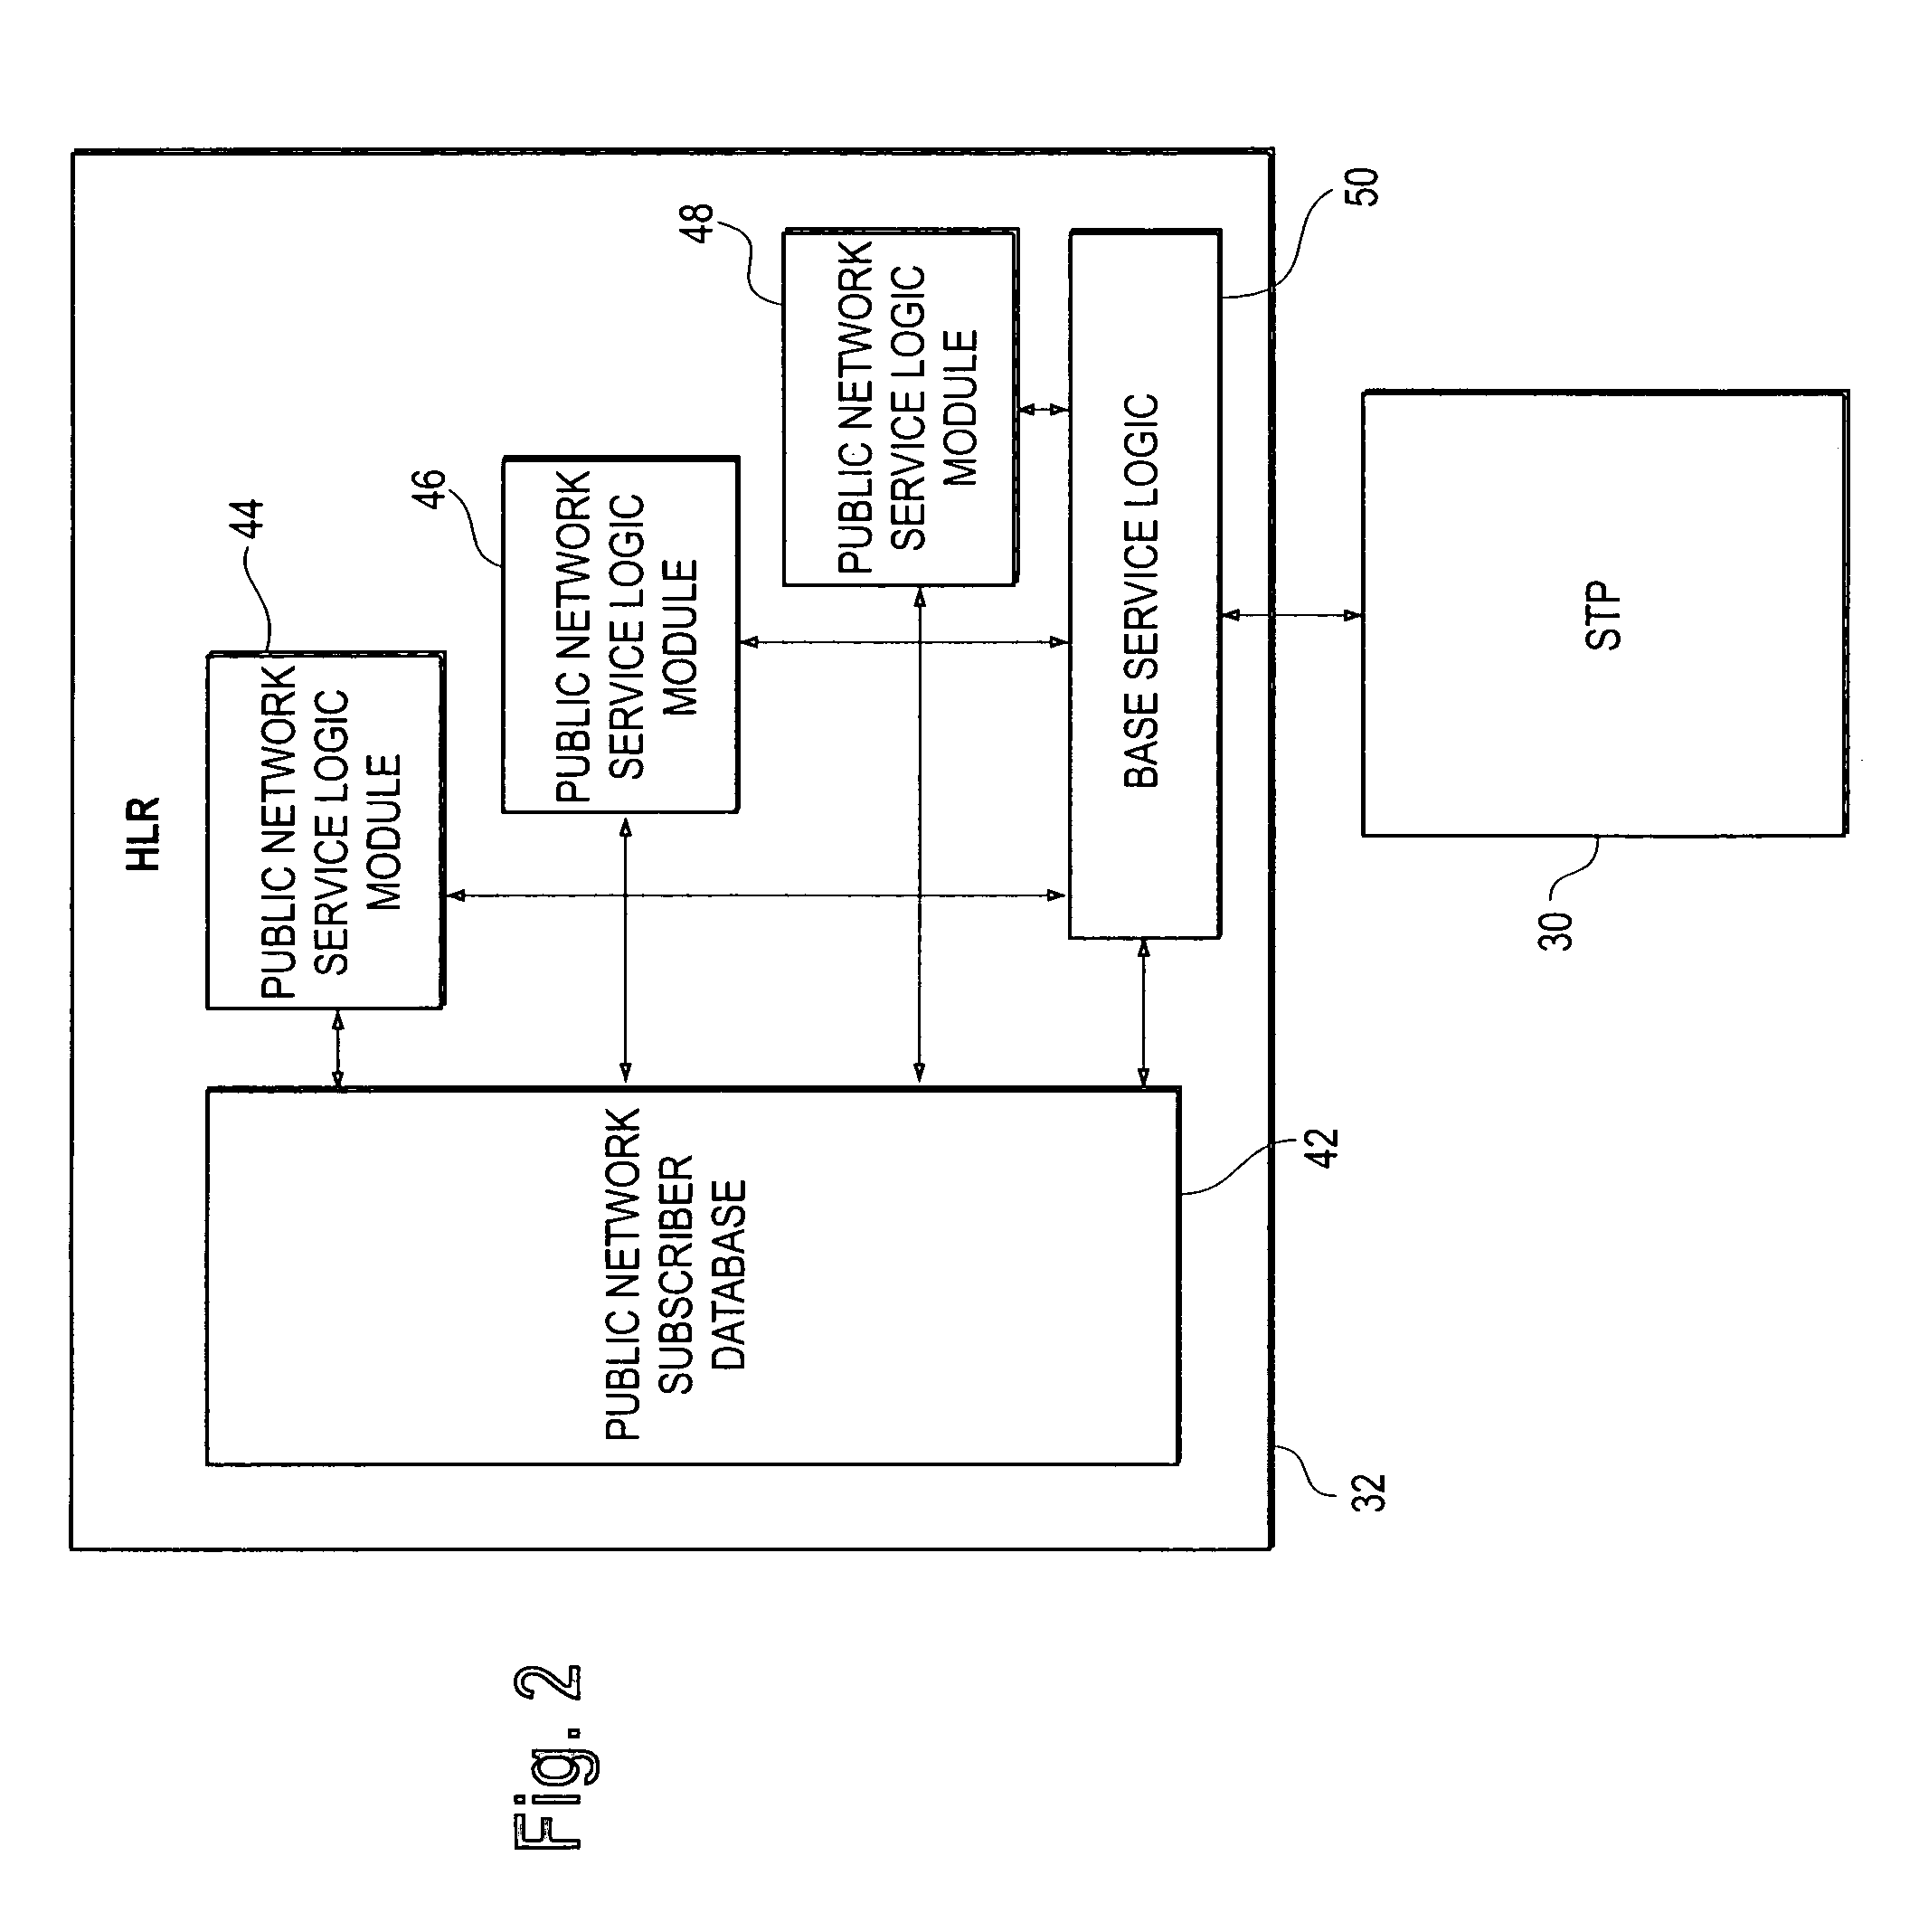 Private wireless network integrated with public wireless network